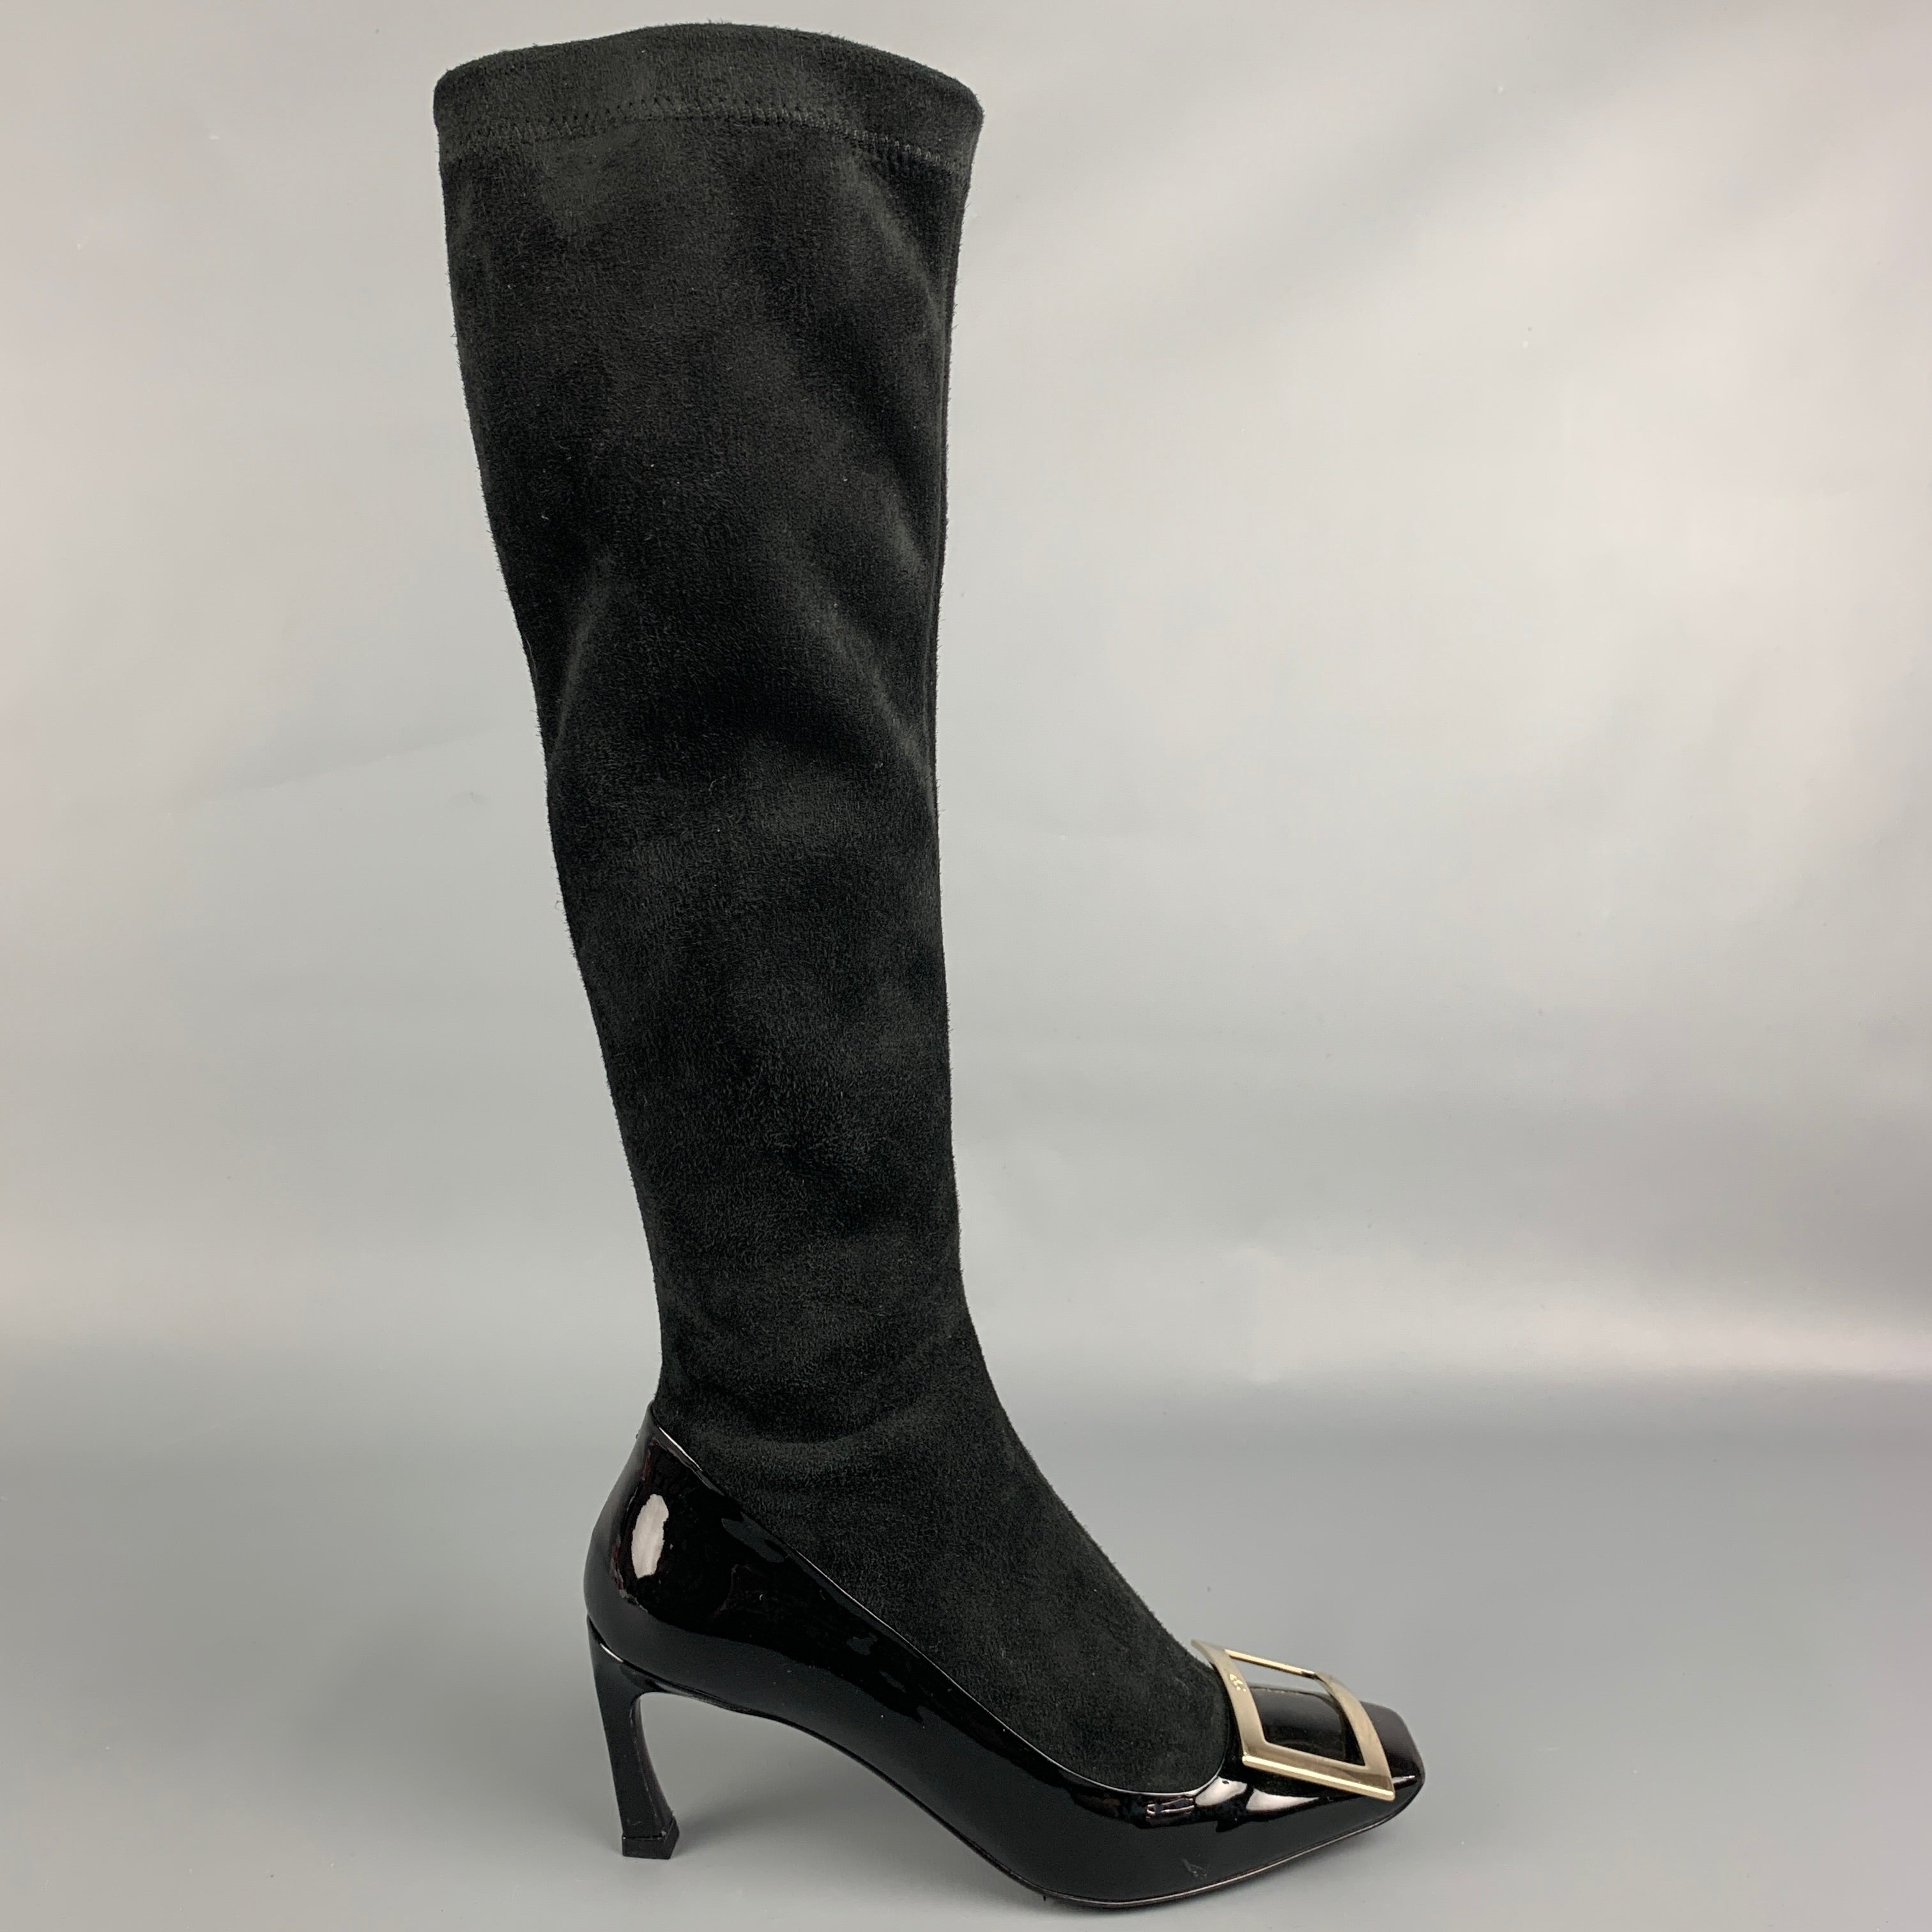 High Heel PU Platform Ankle Boots 20cm Wedge Heel Boots, US Sizes 6 14  No.WG101b From Bjhighheels, $79.4 | DHgate.Com